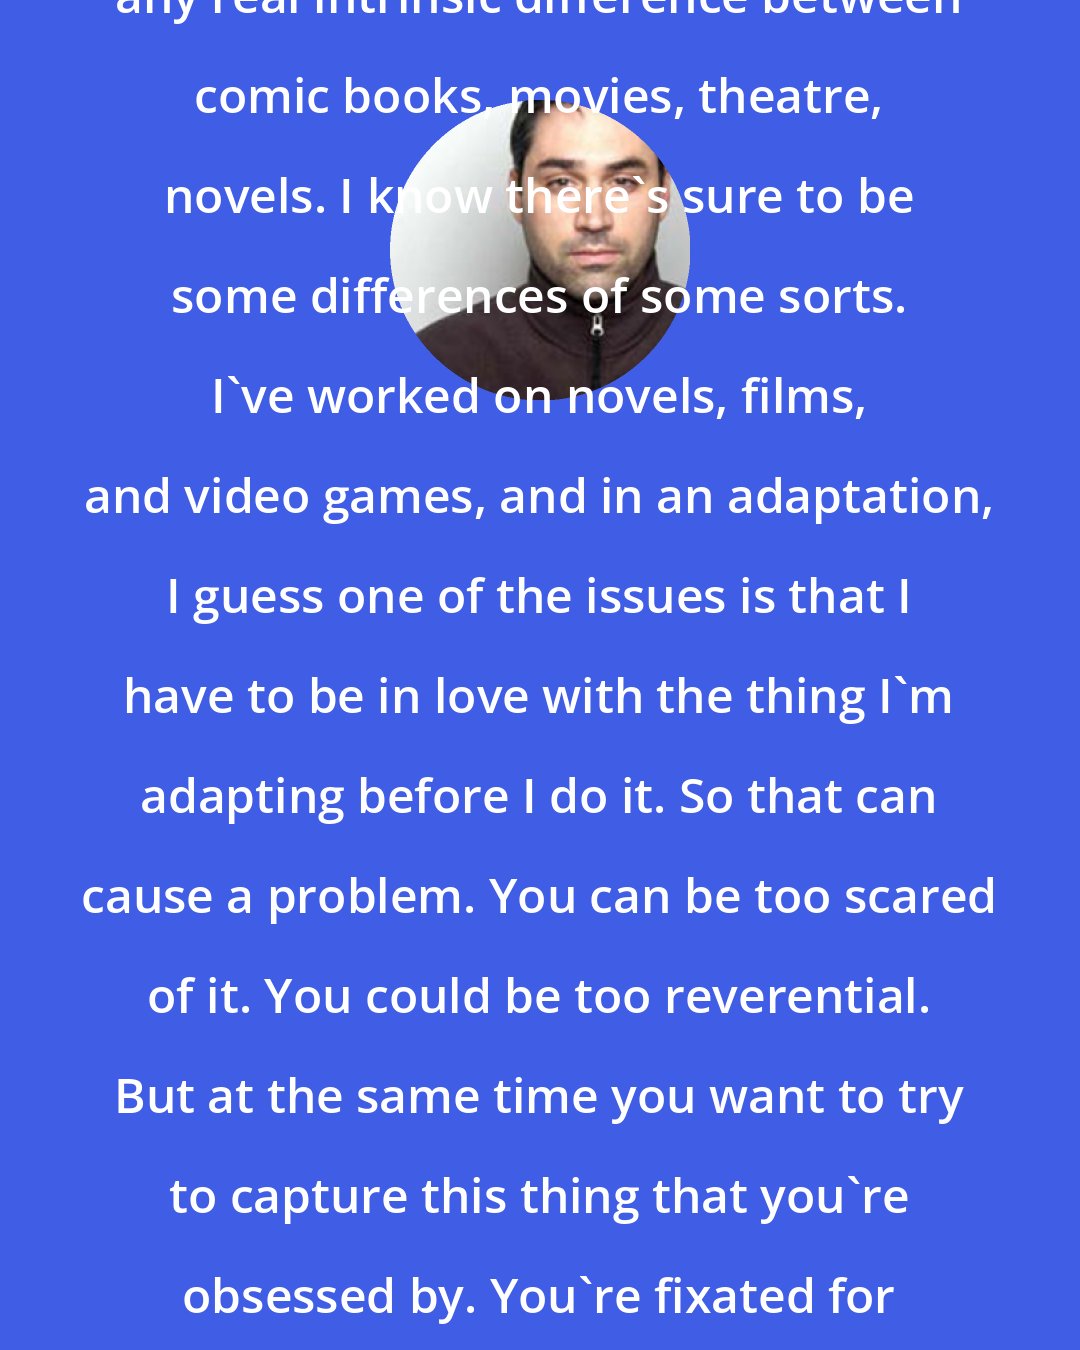 Alex Garland: Personally I don't think there's any real intrinsic difference between comic books, movies, theatre, novels. I know there's sure to be some differences of some sorts. I've worked on novels, films, and video games, and in an adaptation, I guess one of the issues is that I have to be in love with the thing I'm adapting before I do it. So that can cause a problem. You can be too scared of it. You could be too reverential. But at the same time you want to try to capture this thing that you're obsessed by. You're fixated for a reason. What's the reason? You try to get ahold of it.